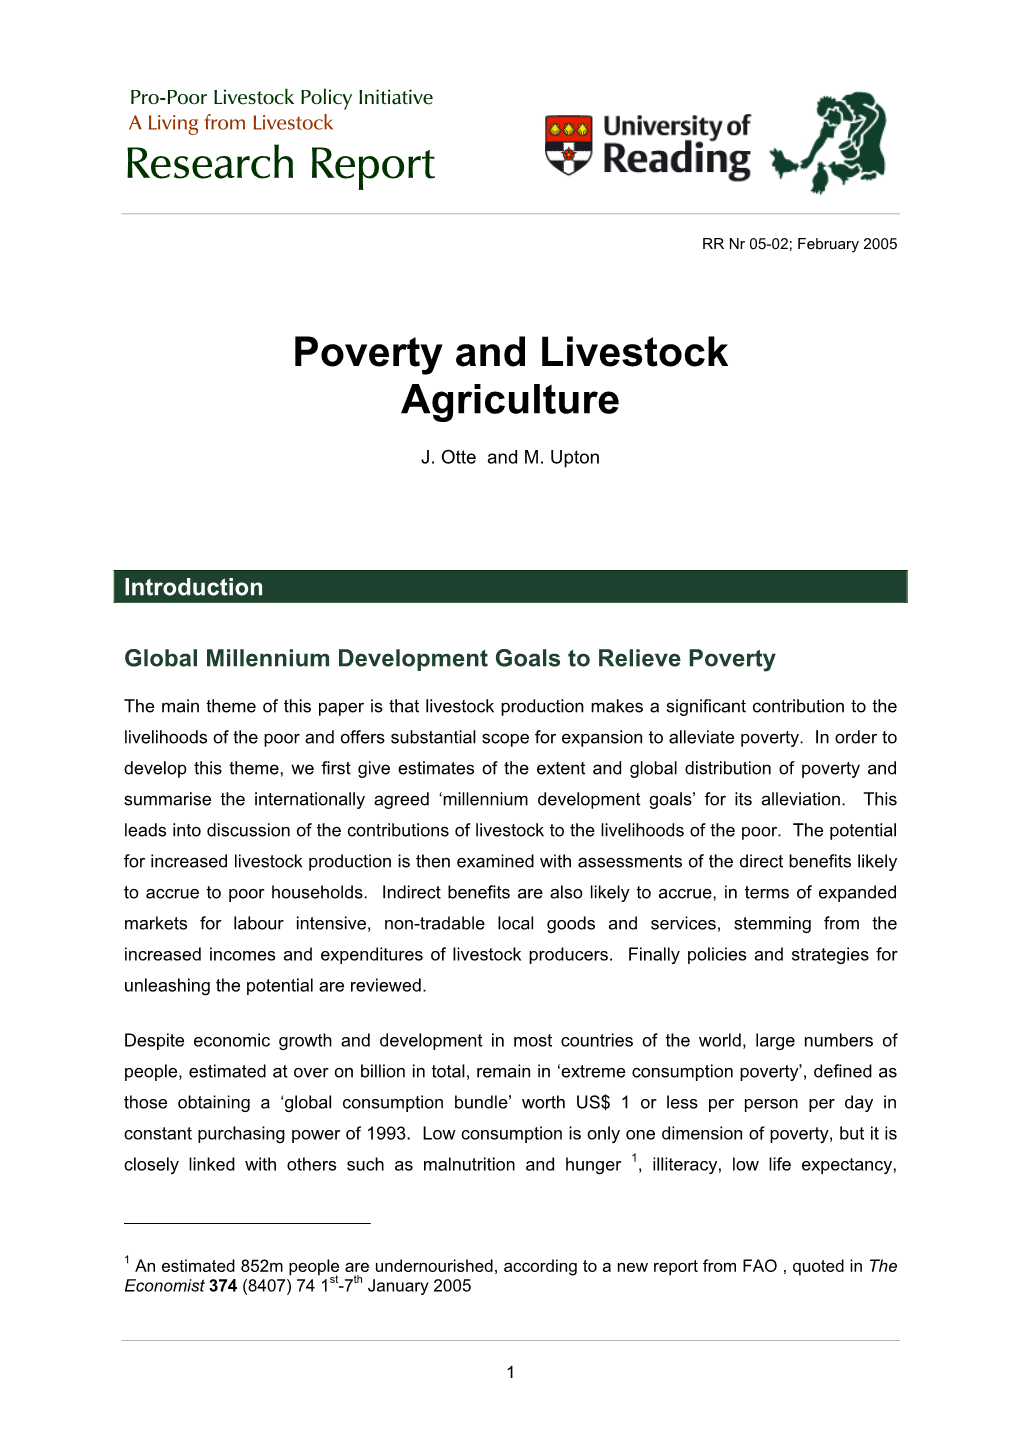 Poverty and Livestock Agriculture